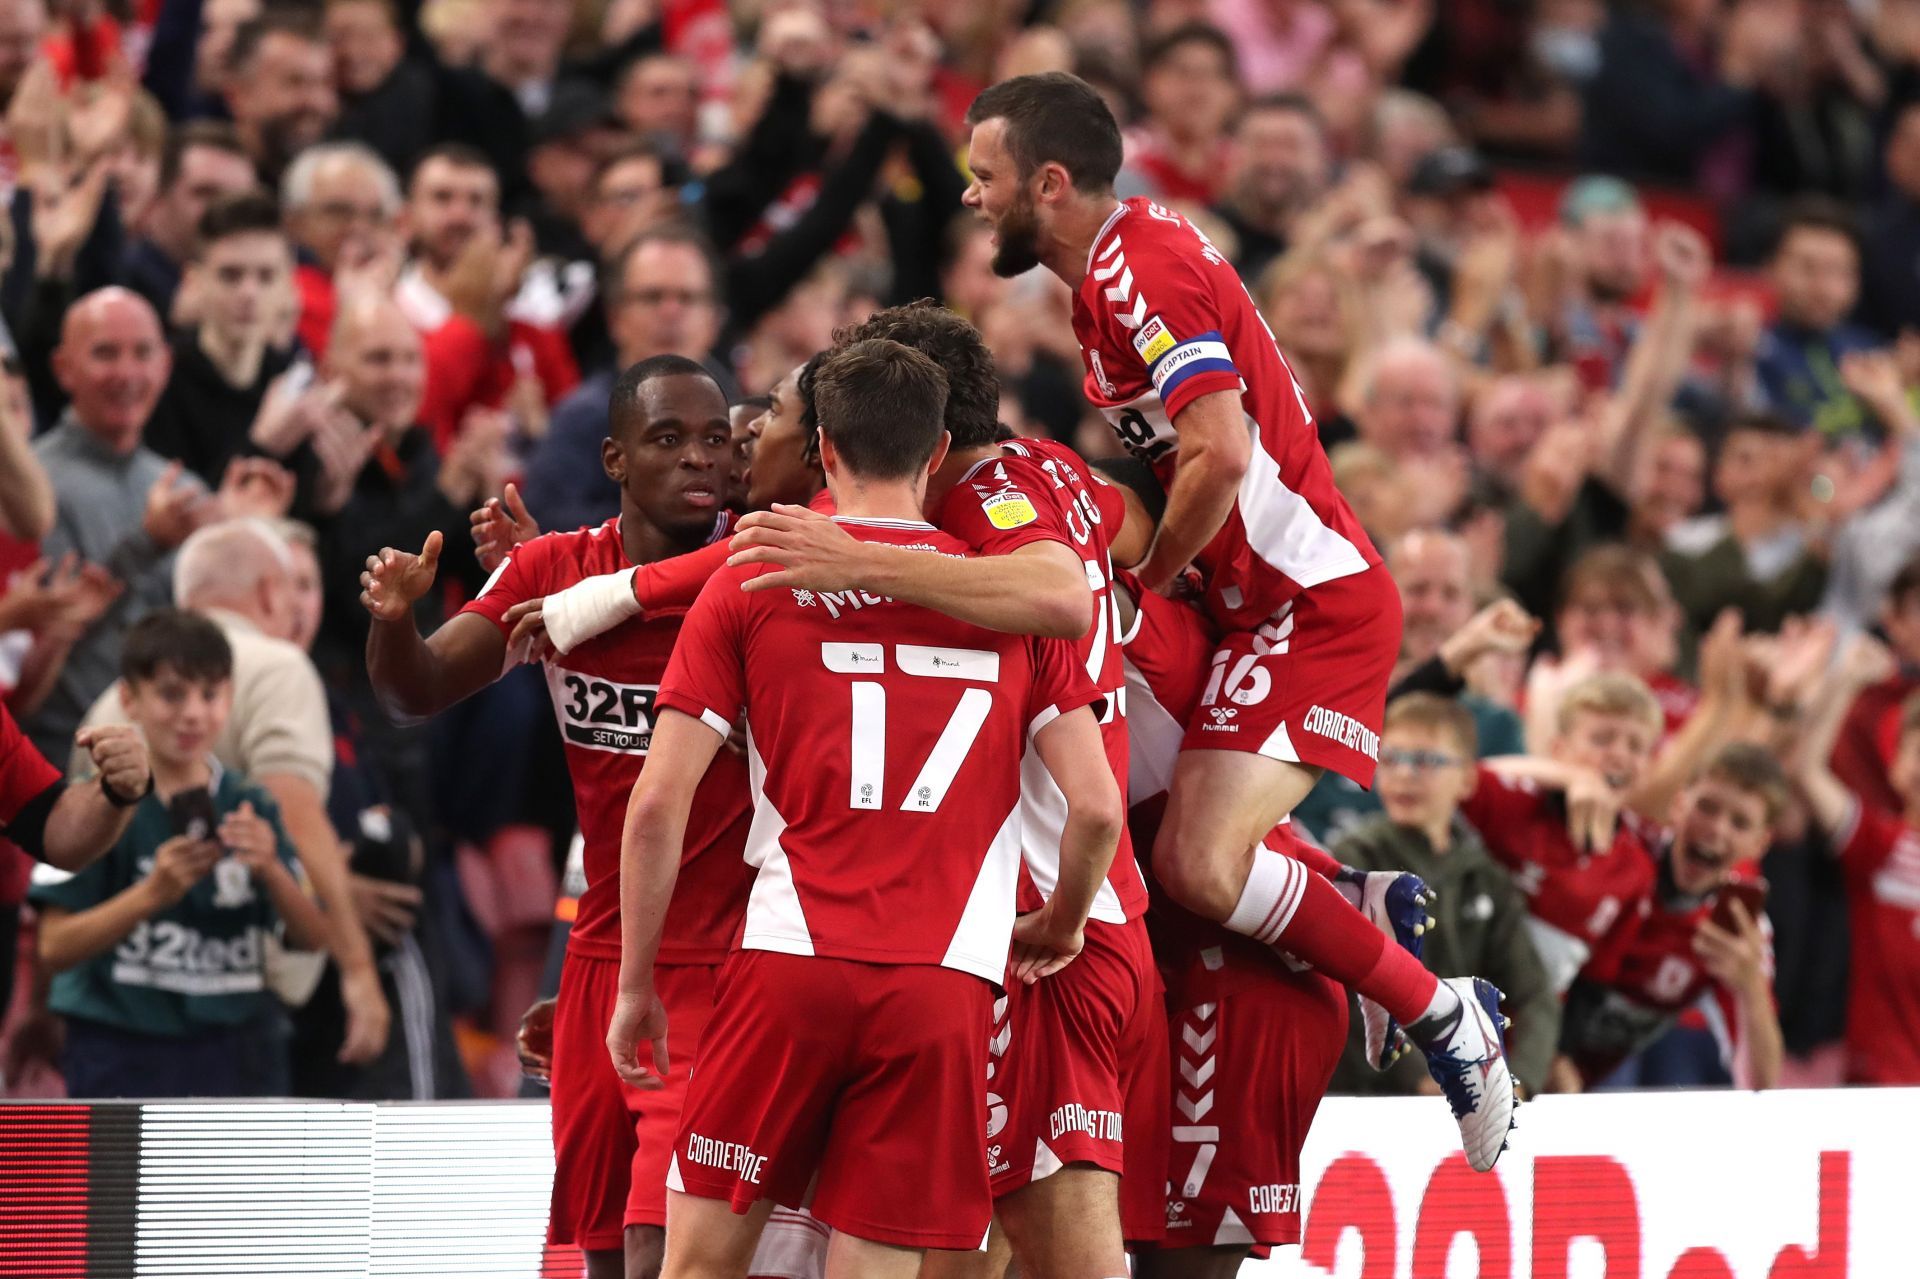 Middlesbrough will face Cardiff City on Saturday